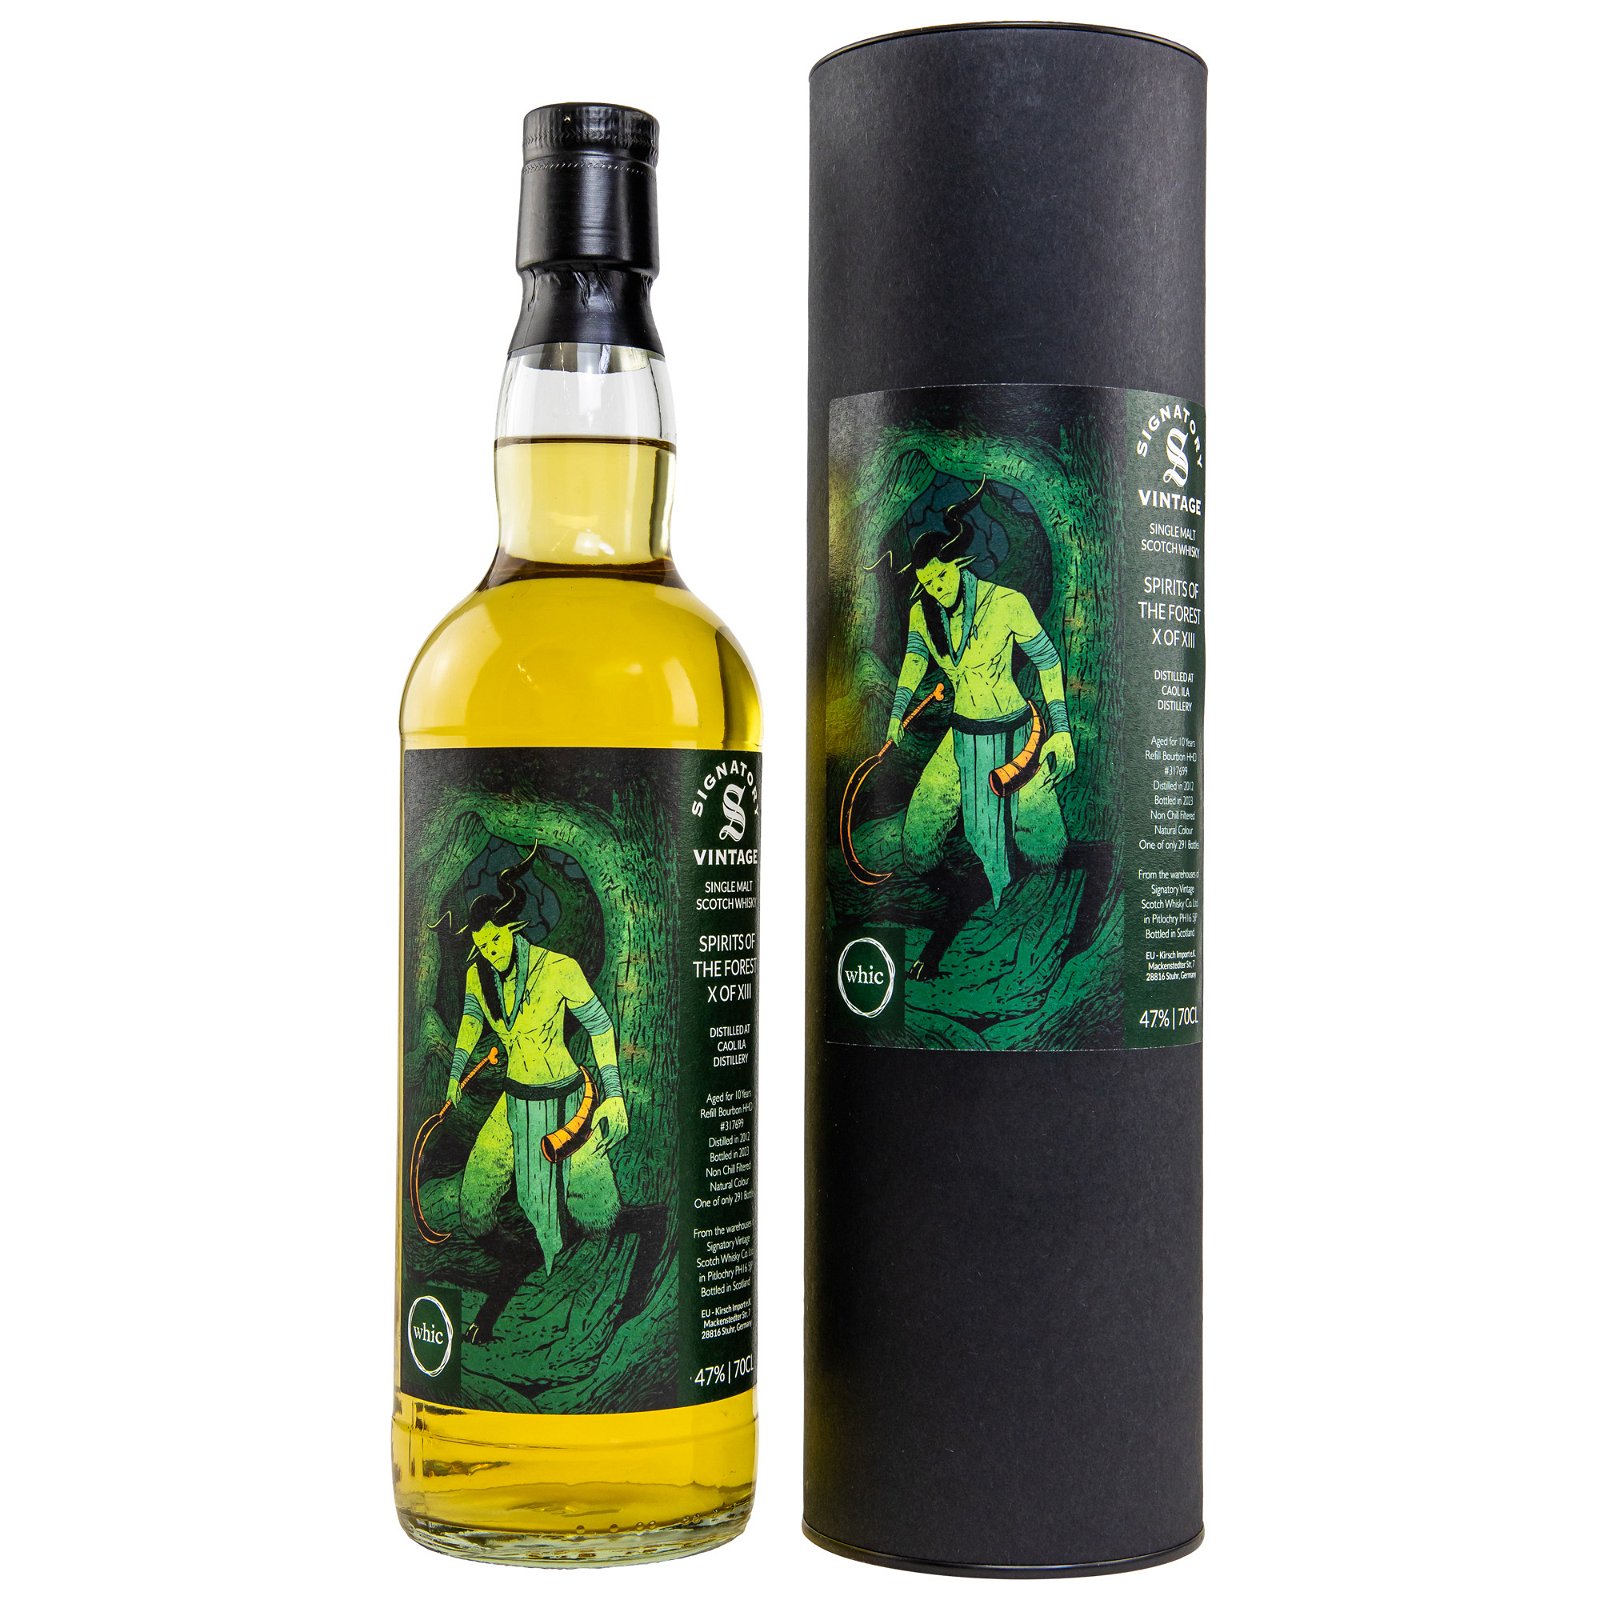 Caol Ila 2012/2023 - 10 Jahre Single Refill Bourbon Hogshead No. 317699 Spirits of the Forest X of XIII (whic)